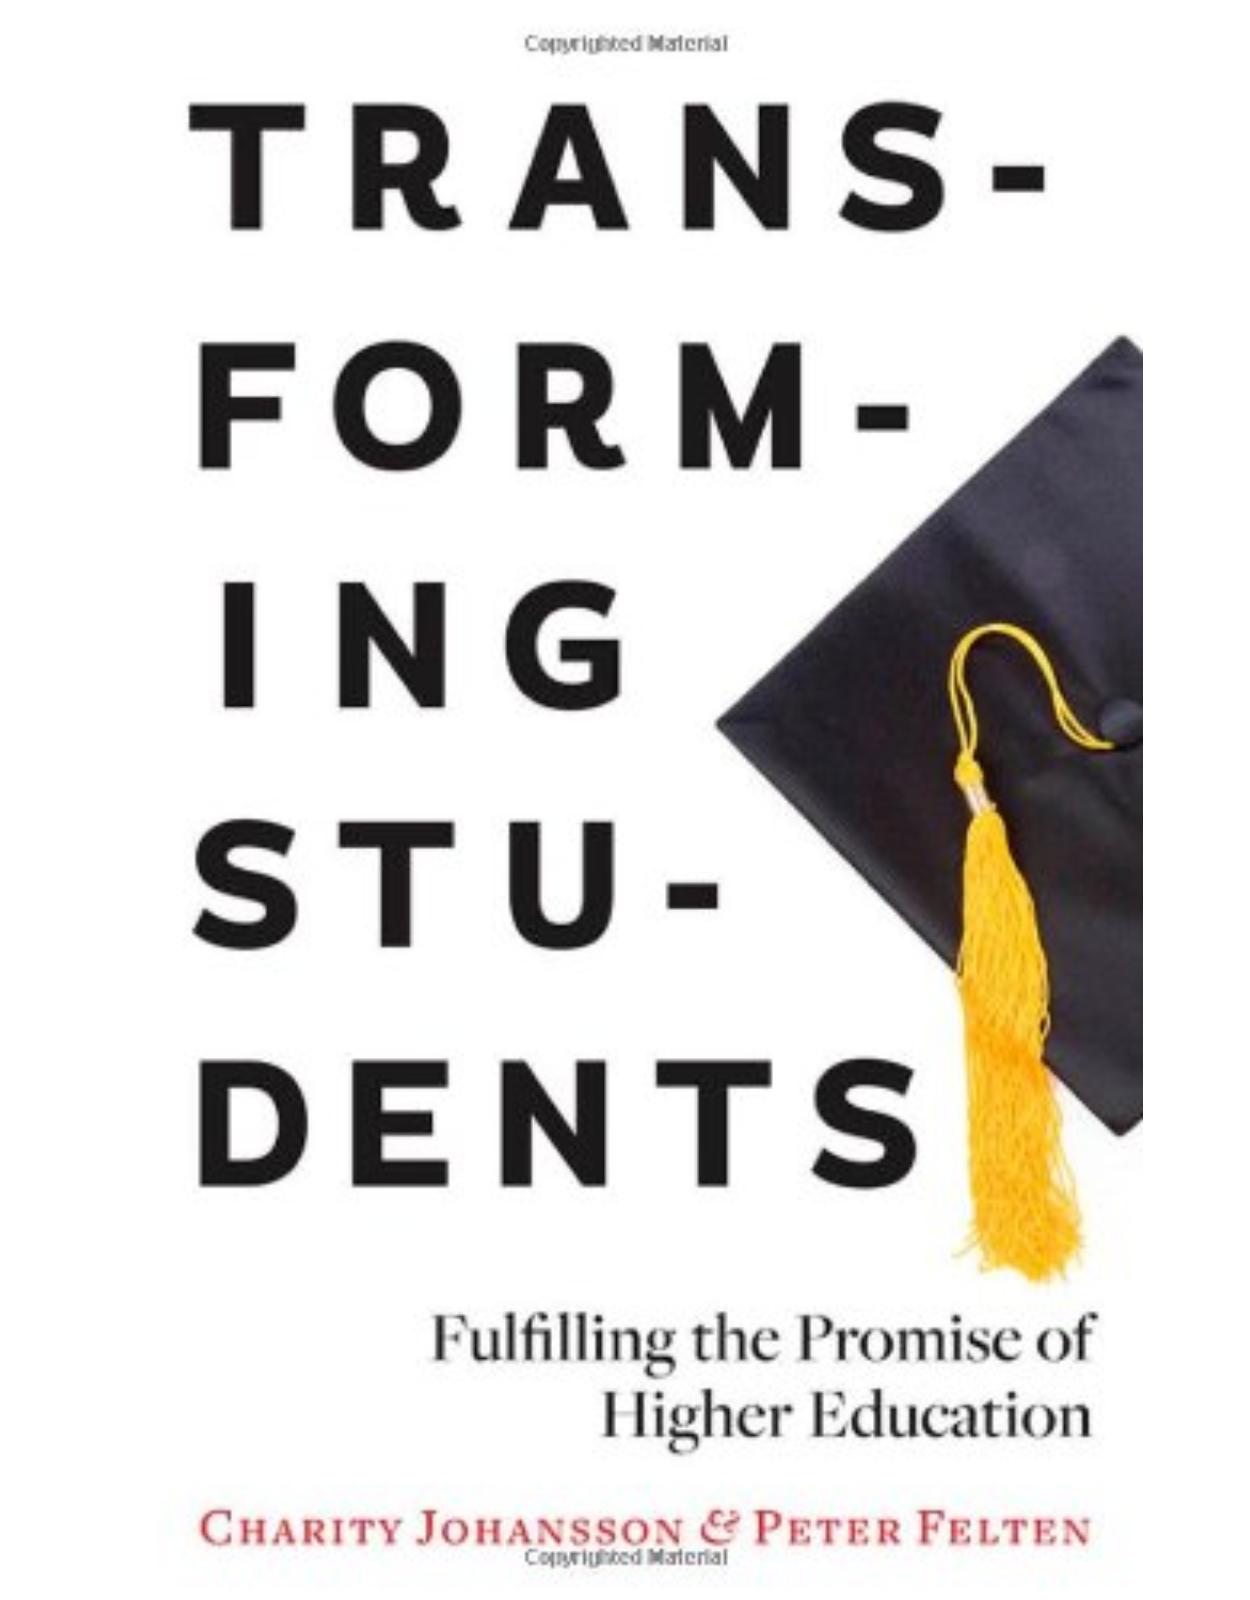 Transforming Students, Fulfilling the Promise of Higher Education